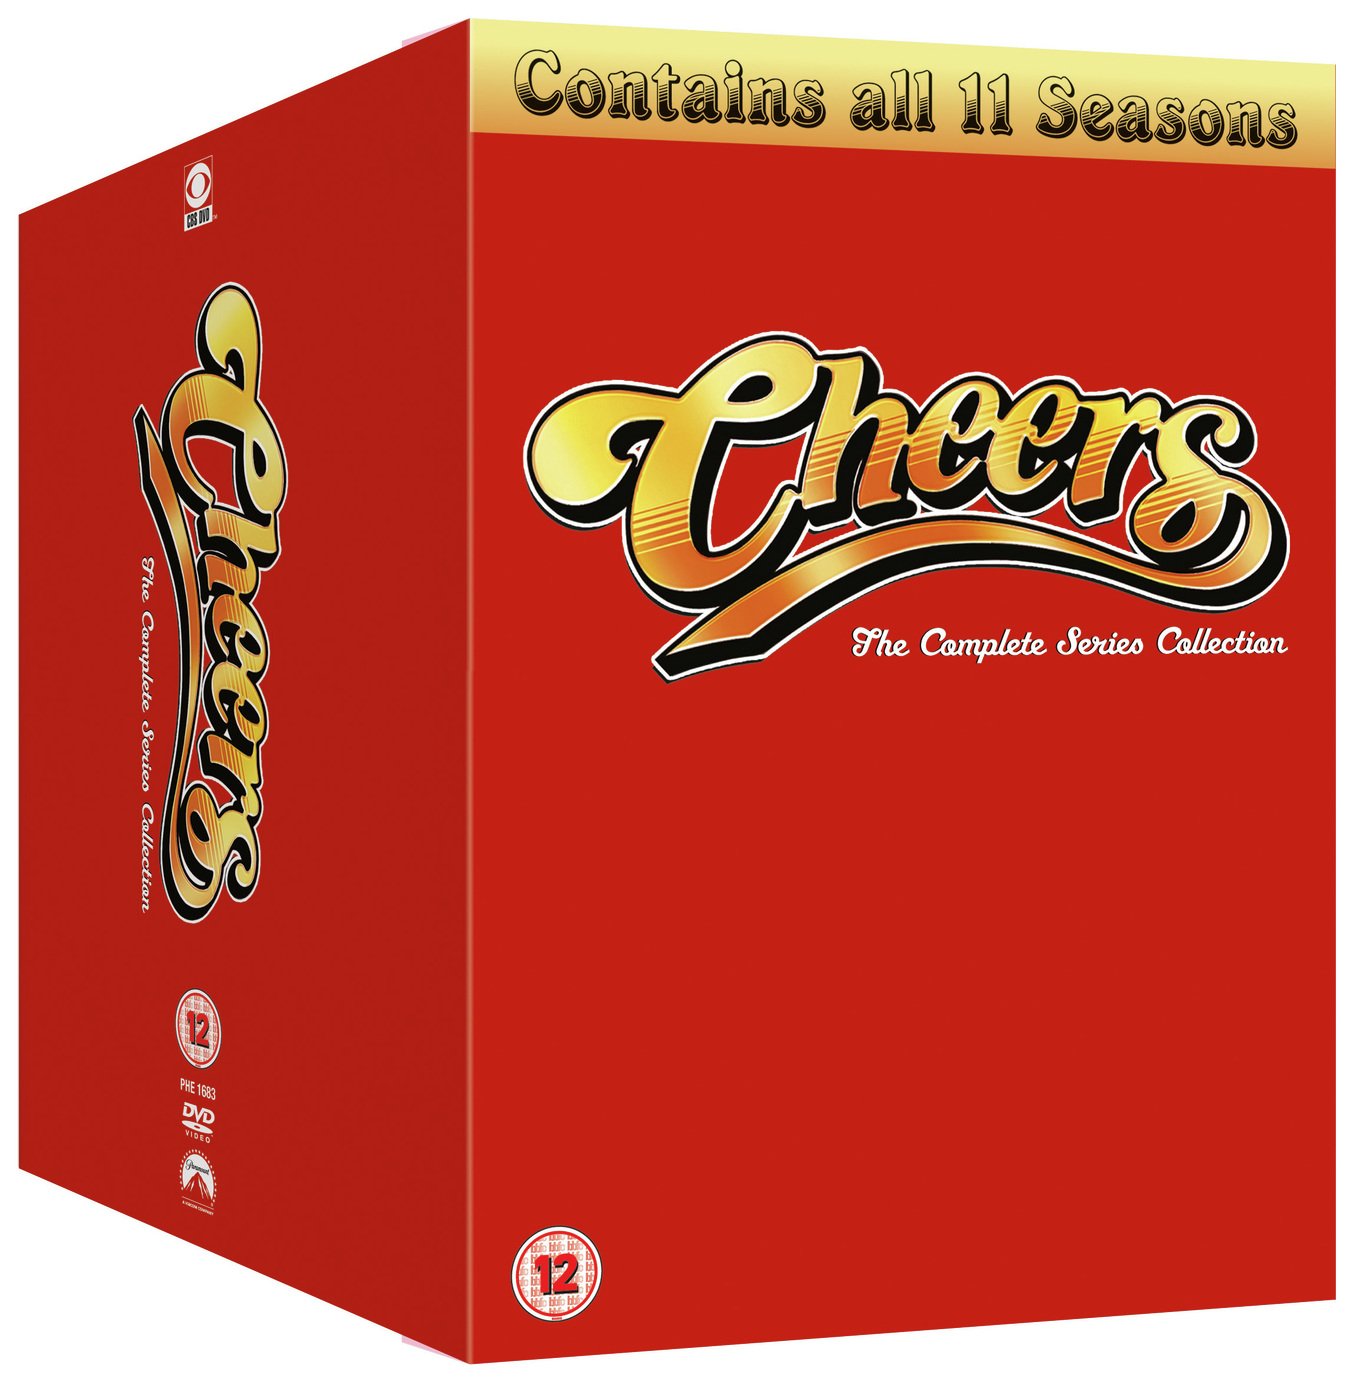 Cheers: The Complete Series 1-11 DVD Box Set review